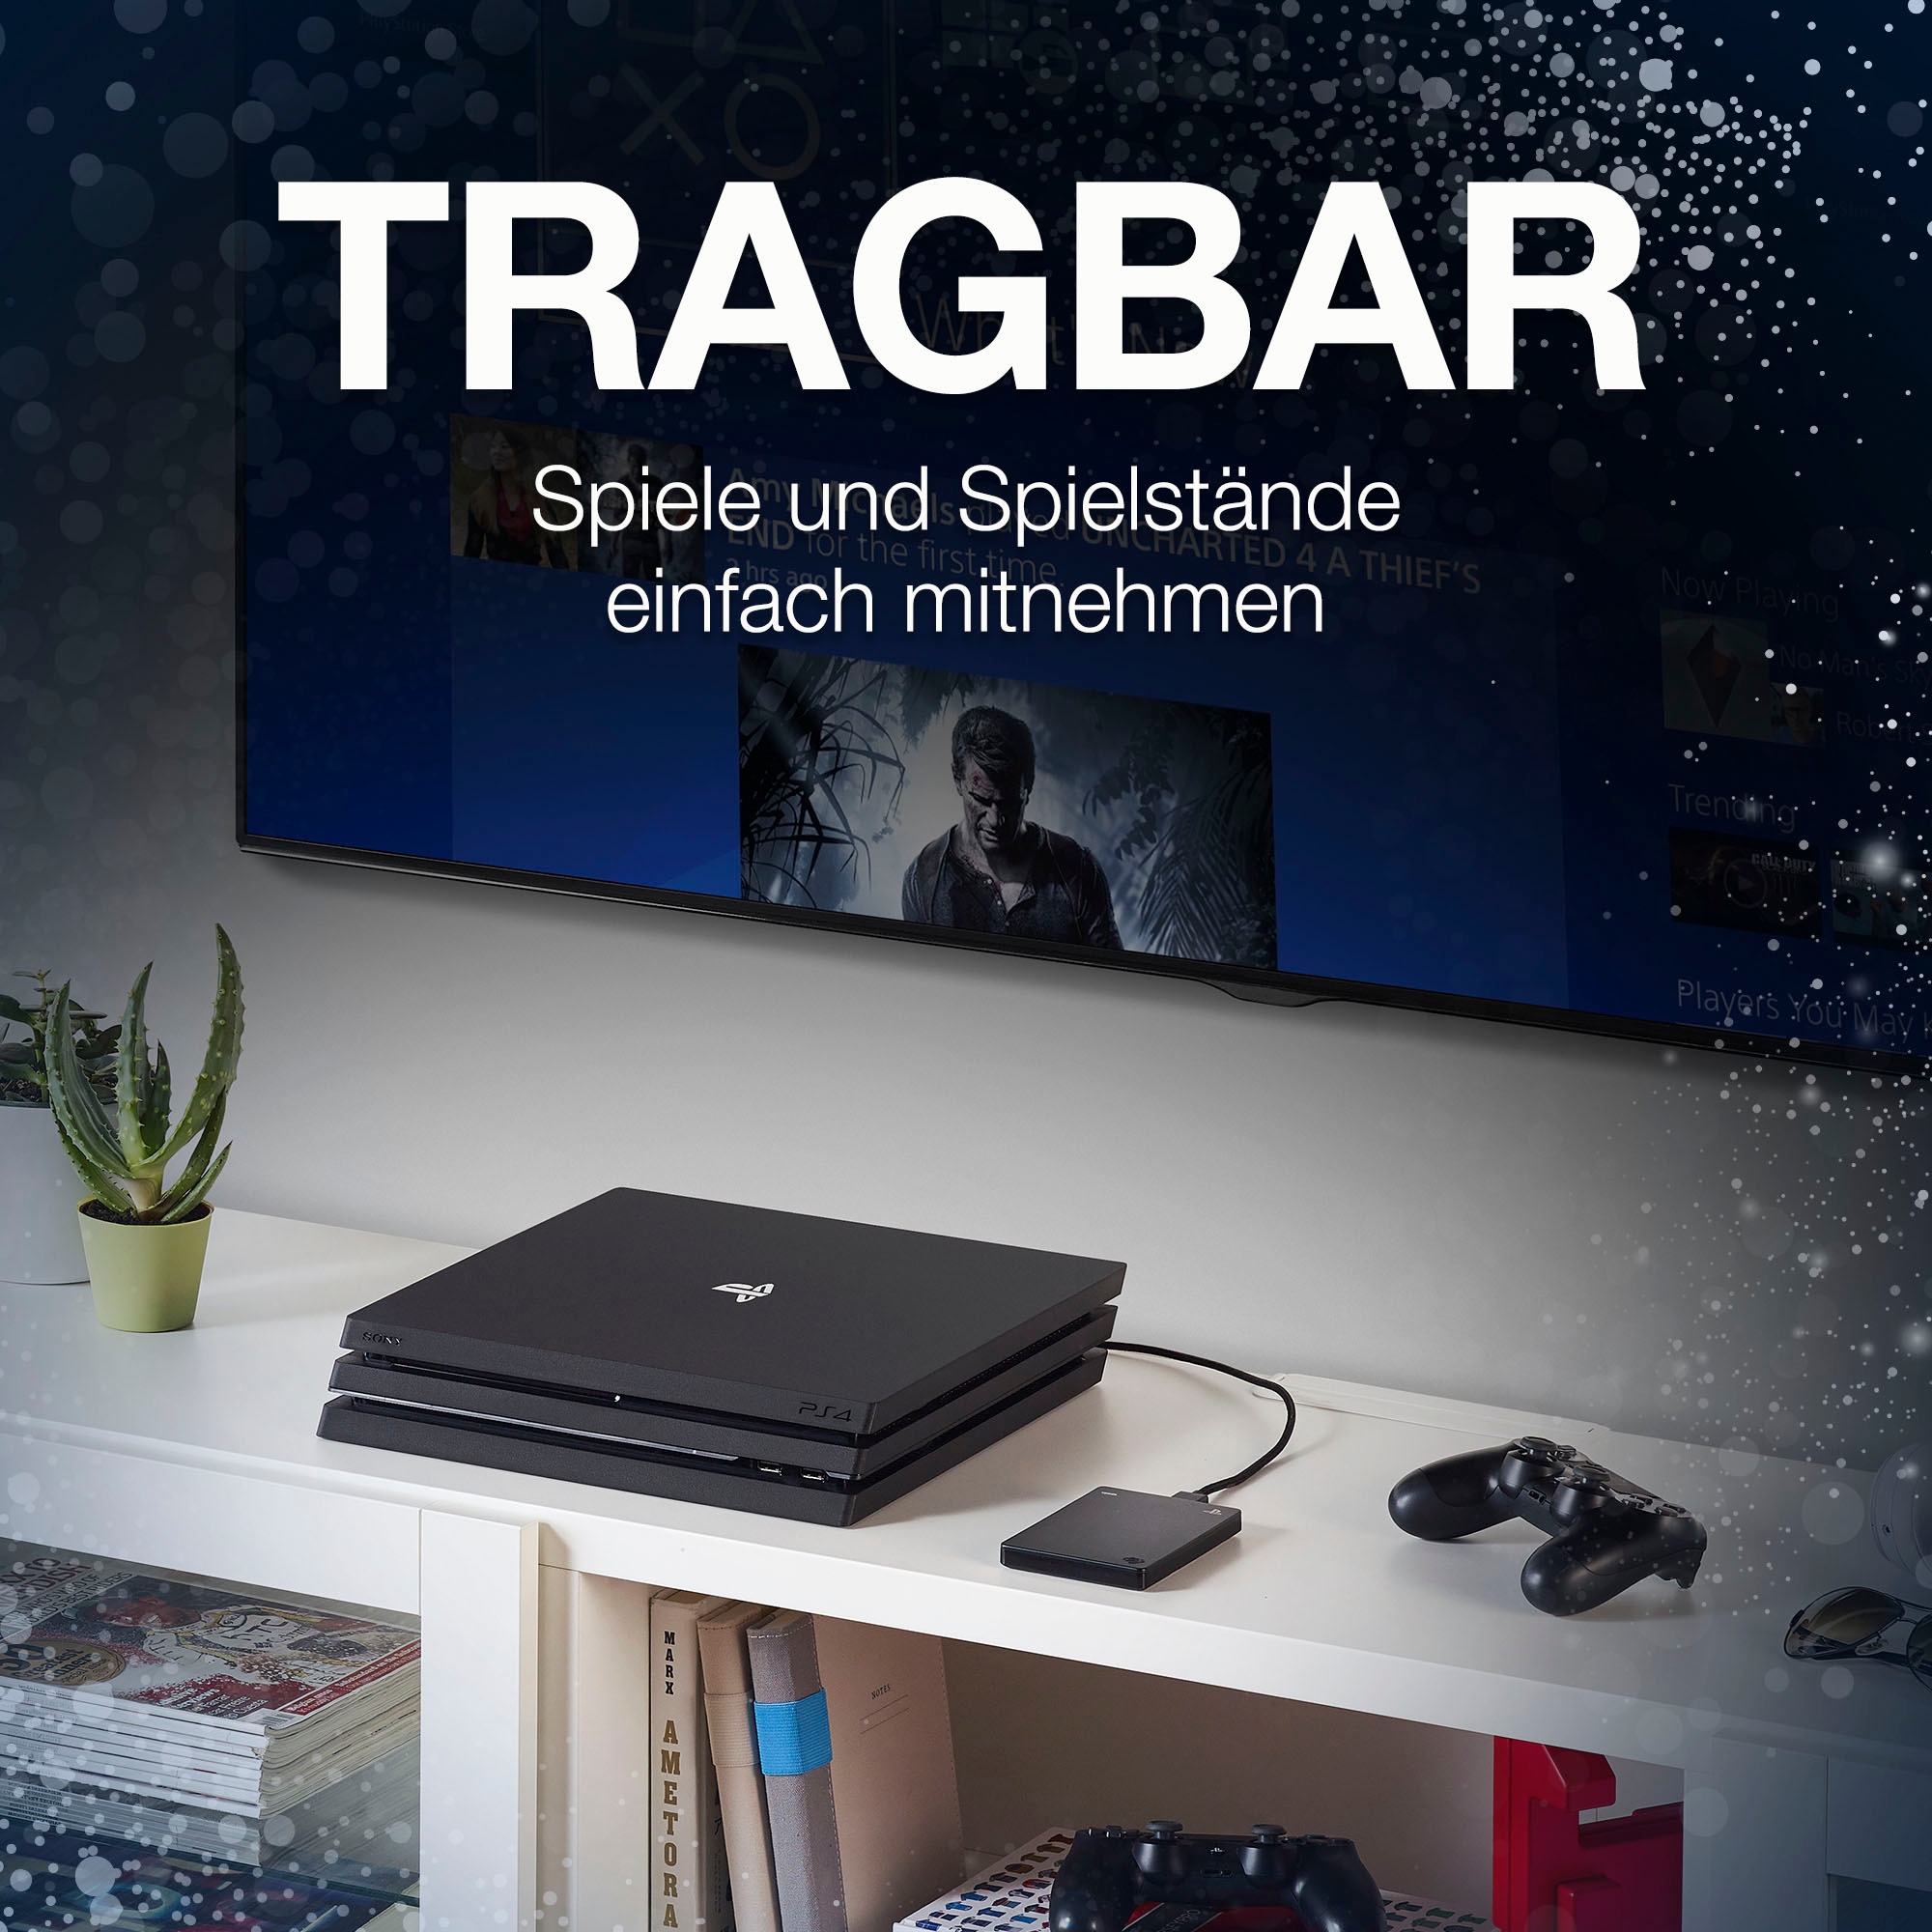 Seagate externe Gaming-Festplatte »Game Drive PS4 STGD2000200«, 2,5 Zoll,  Anschluss USB 3.2 | BAUR